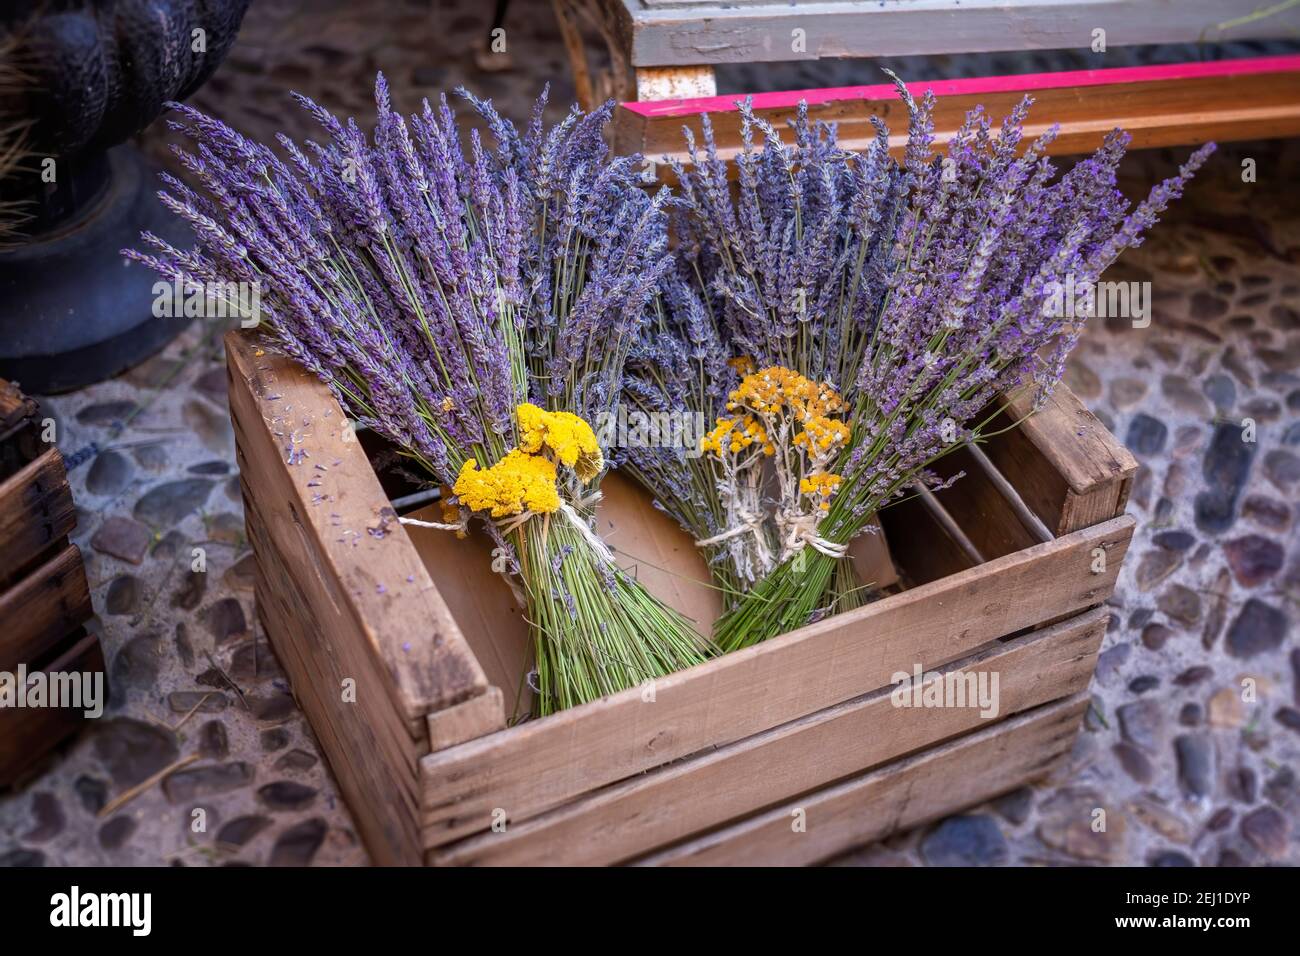 lavender bouquets decorated with yellow flowers of Helichrysum stoechas, inside a wooden box at a flower market in Brihuega, Guadalajara Spain Stock Photo